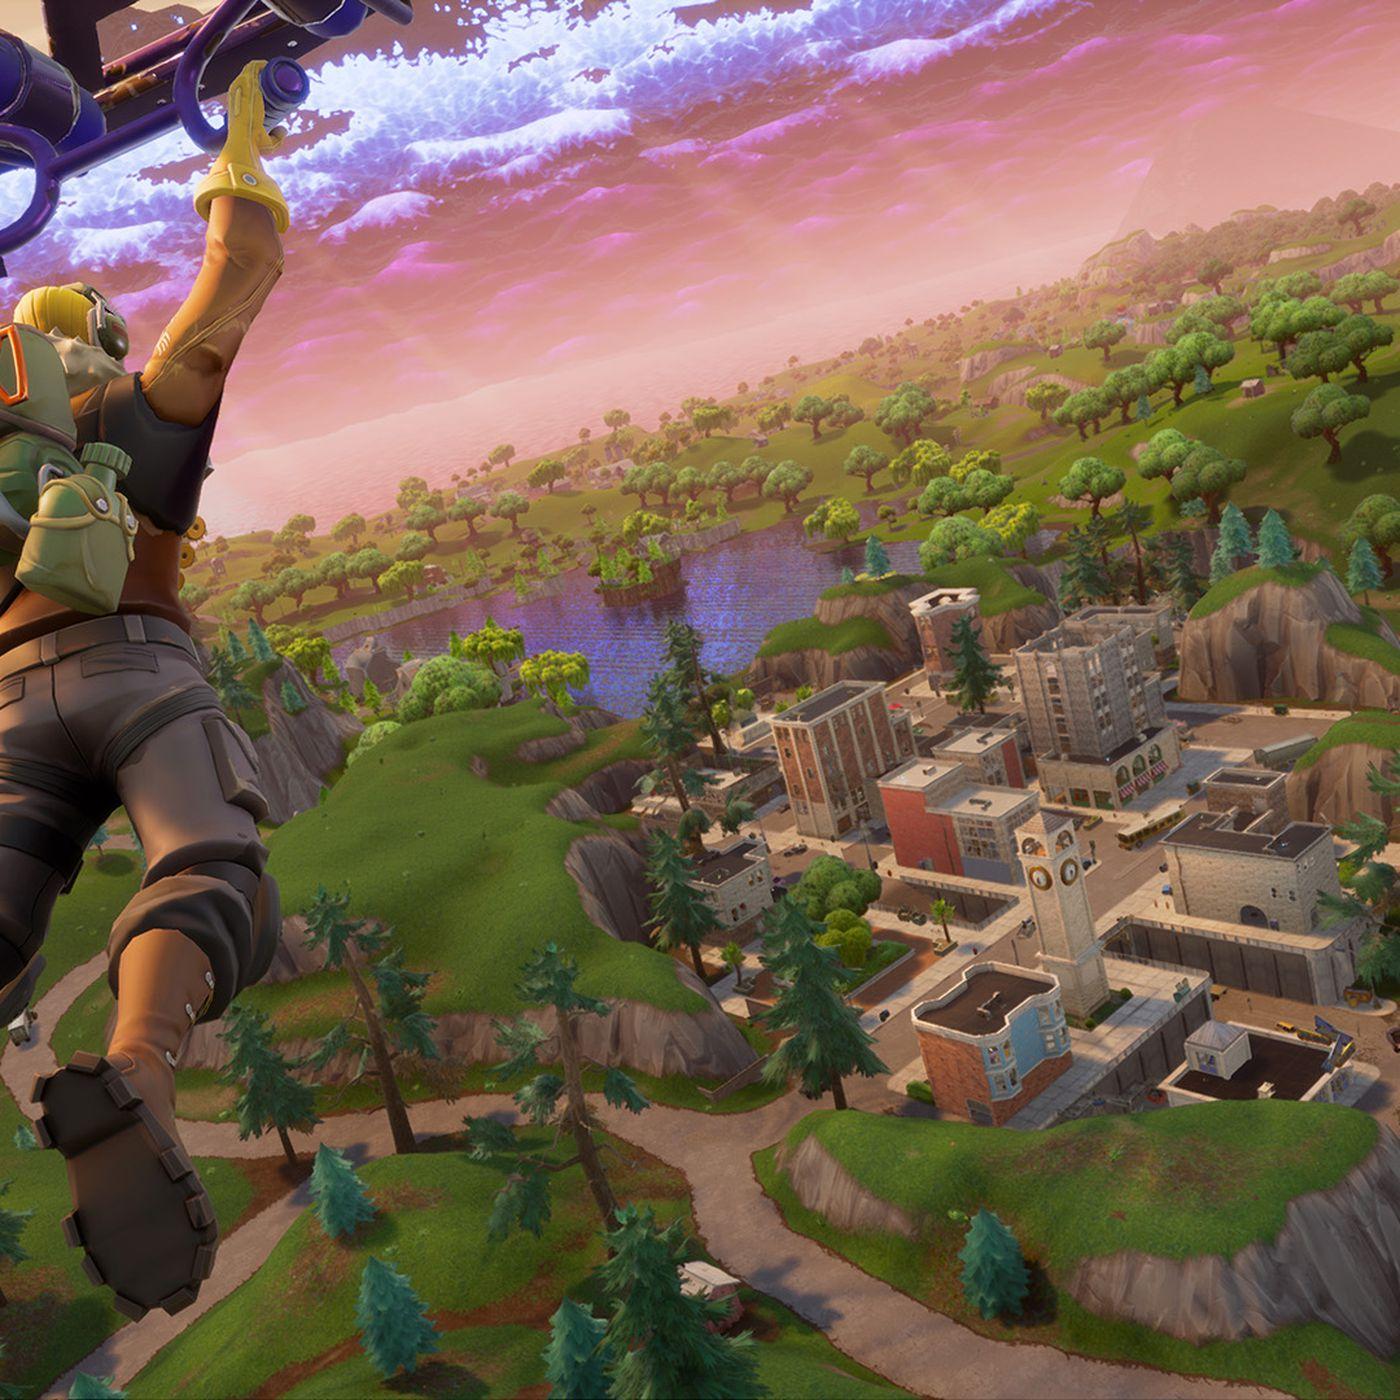 Fortnite players are preparing for Tilted Towers' final hours